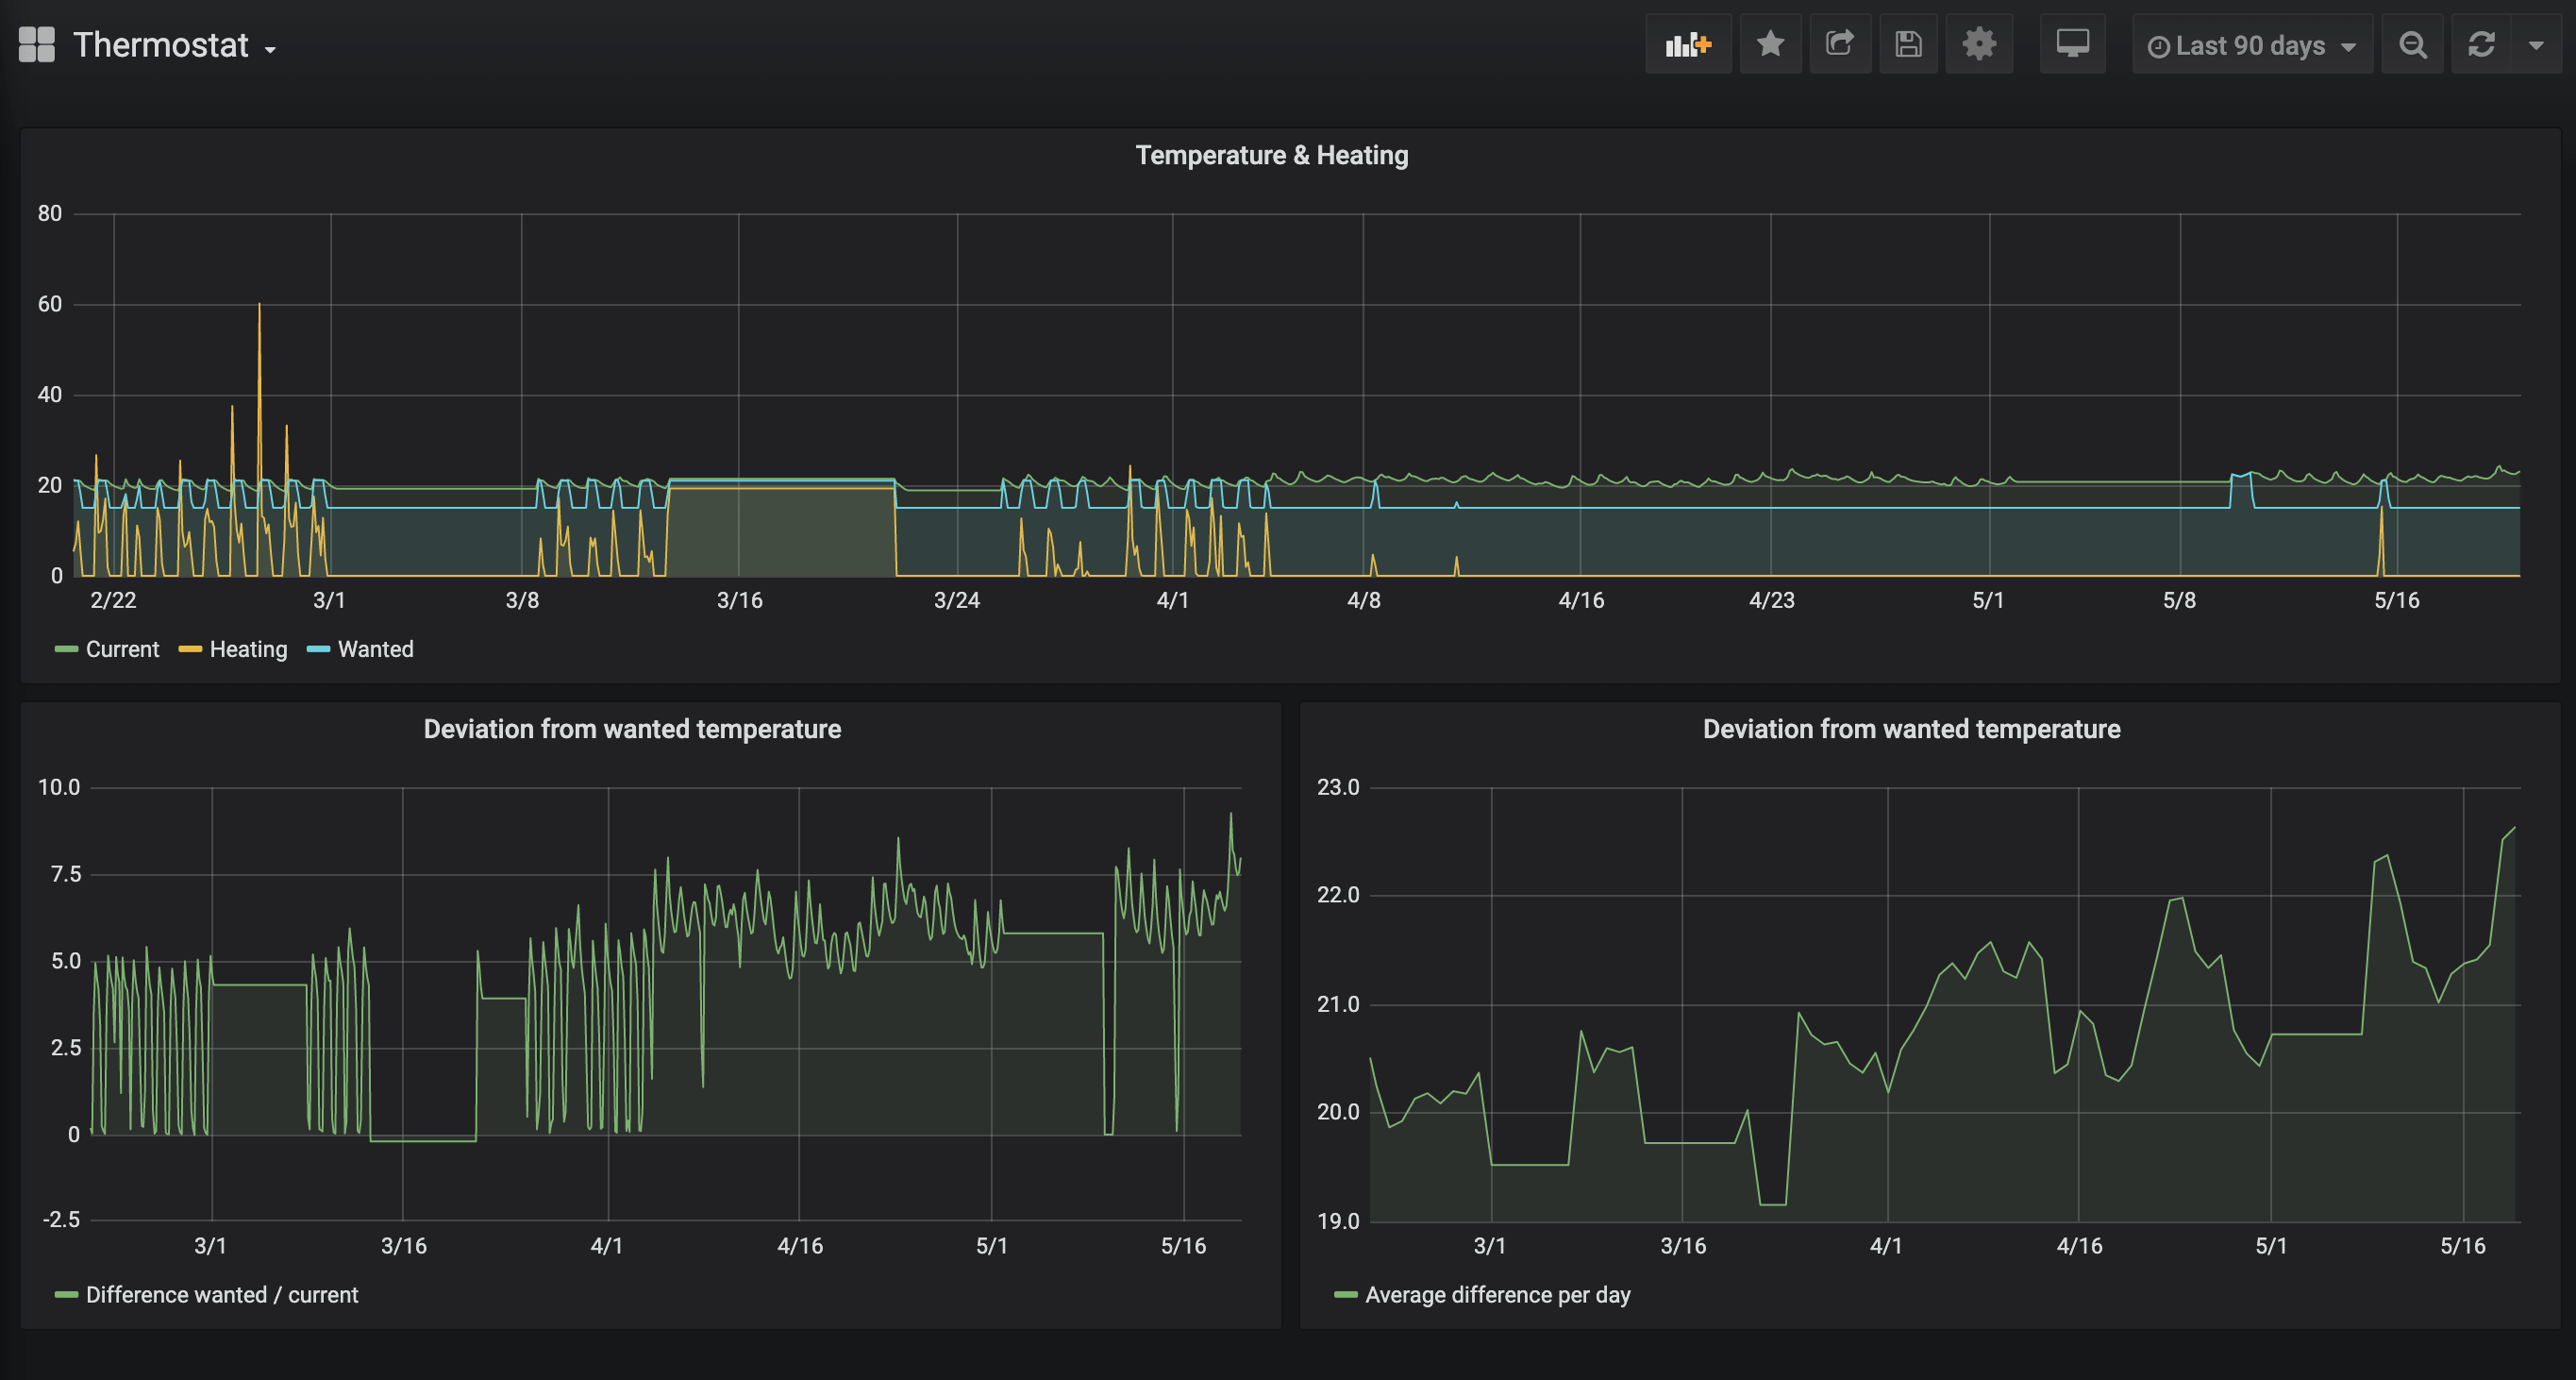 indoor temperature and heating data over time, based on tado smart thermostat